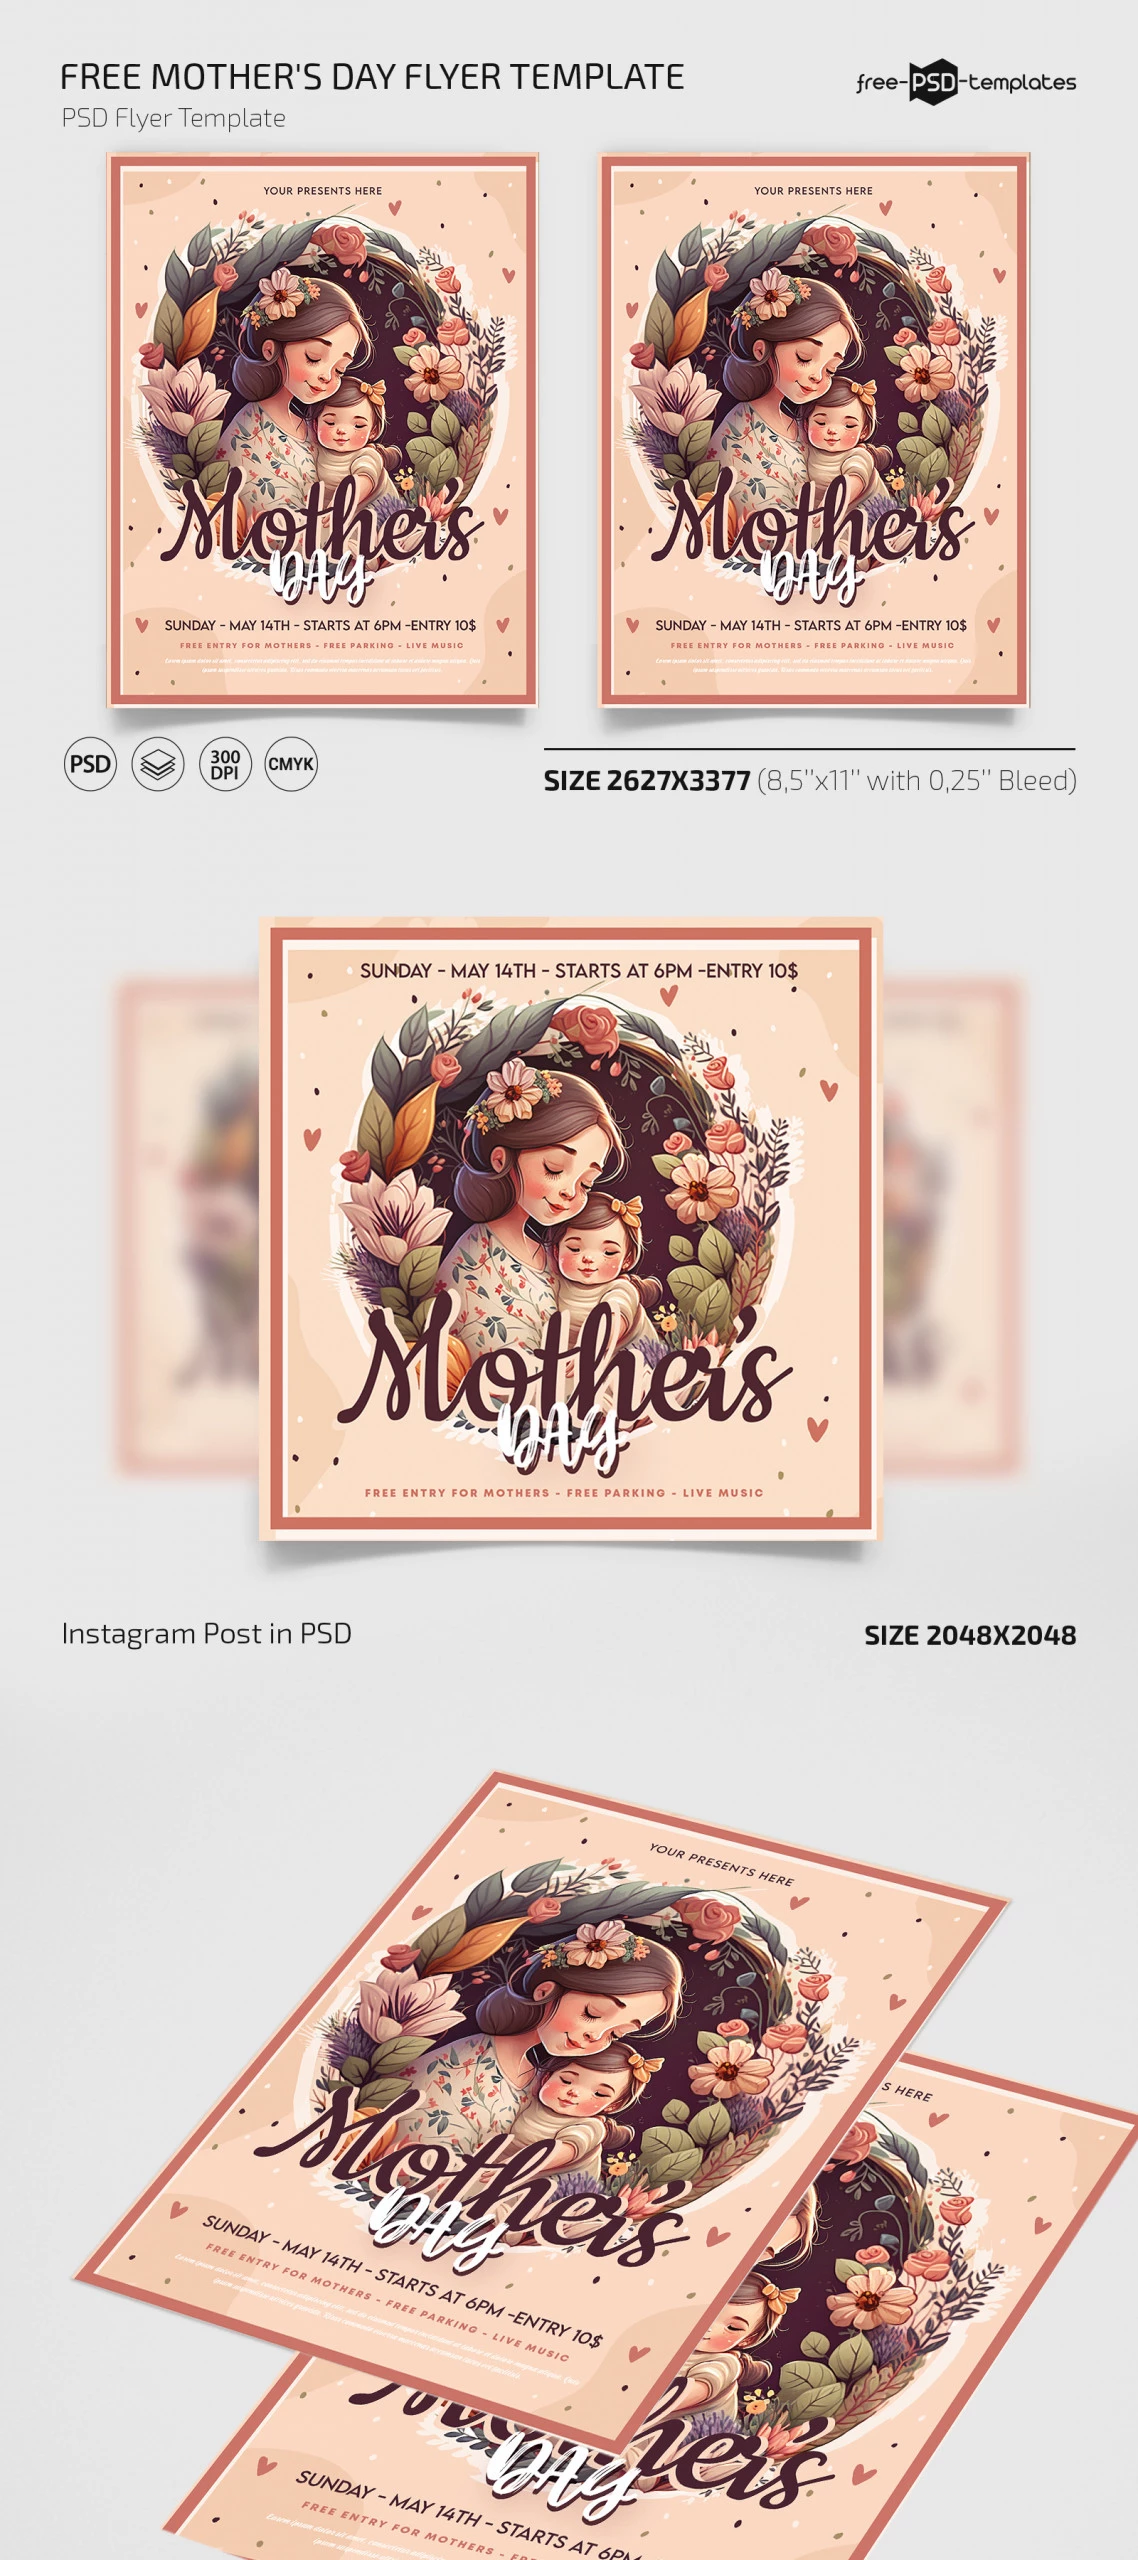 Free Mother’s Day Flyer